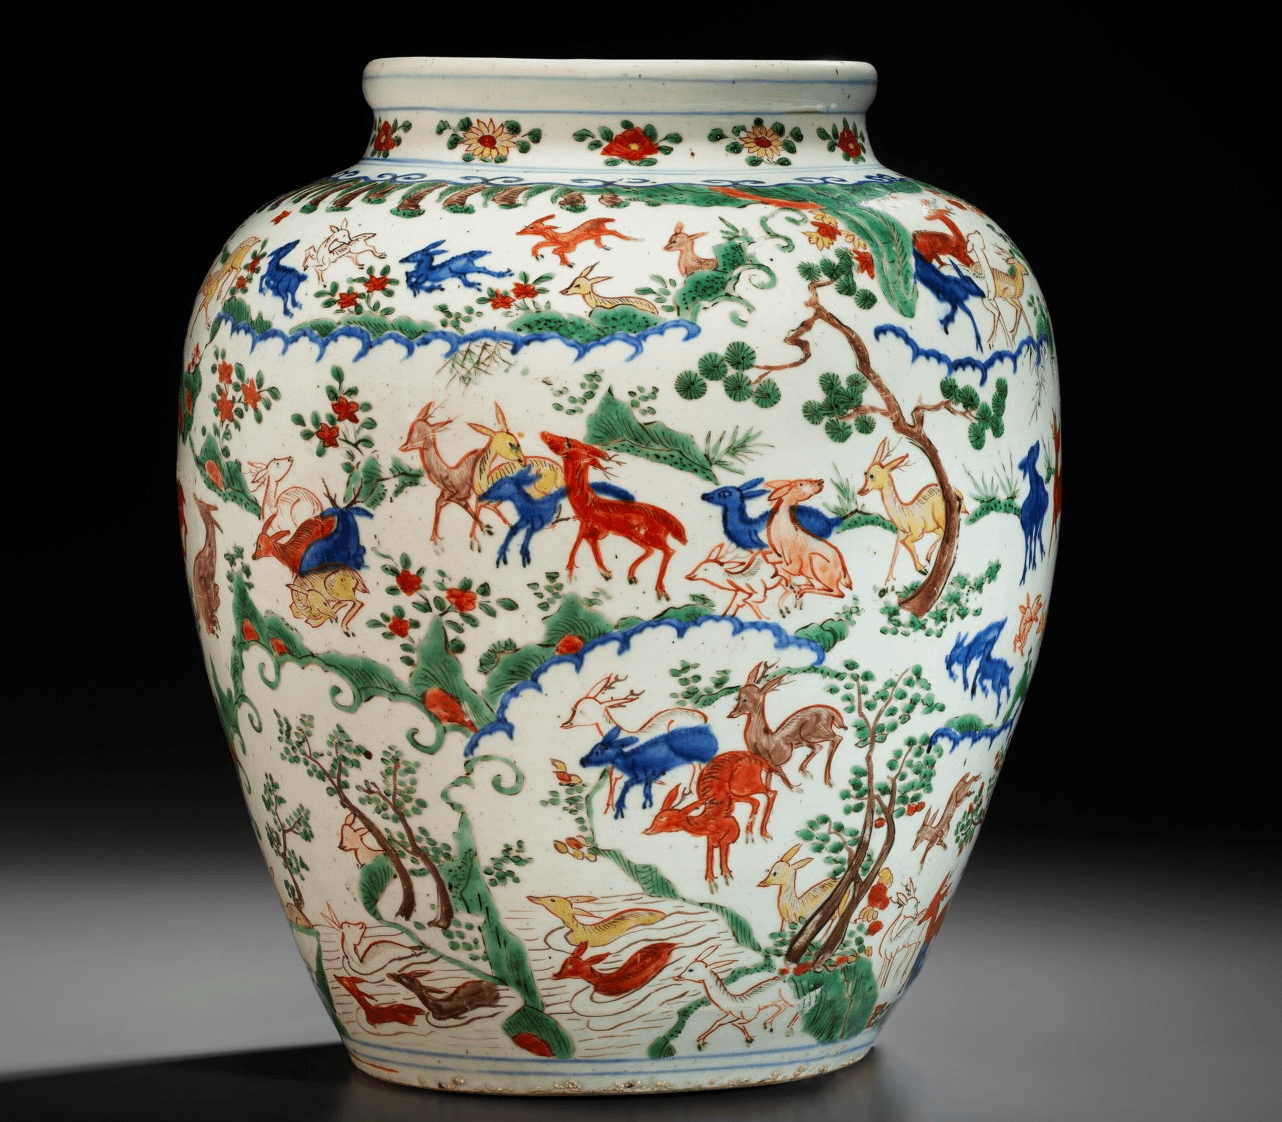 A Christie’s Sale of Imperial Chinese Porcelain Could Inject New Life into a Fragile Market